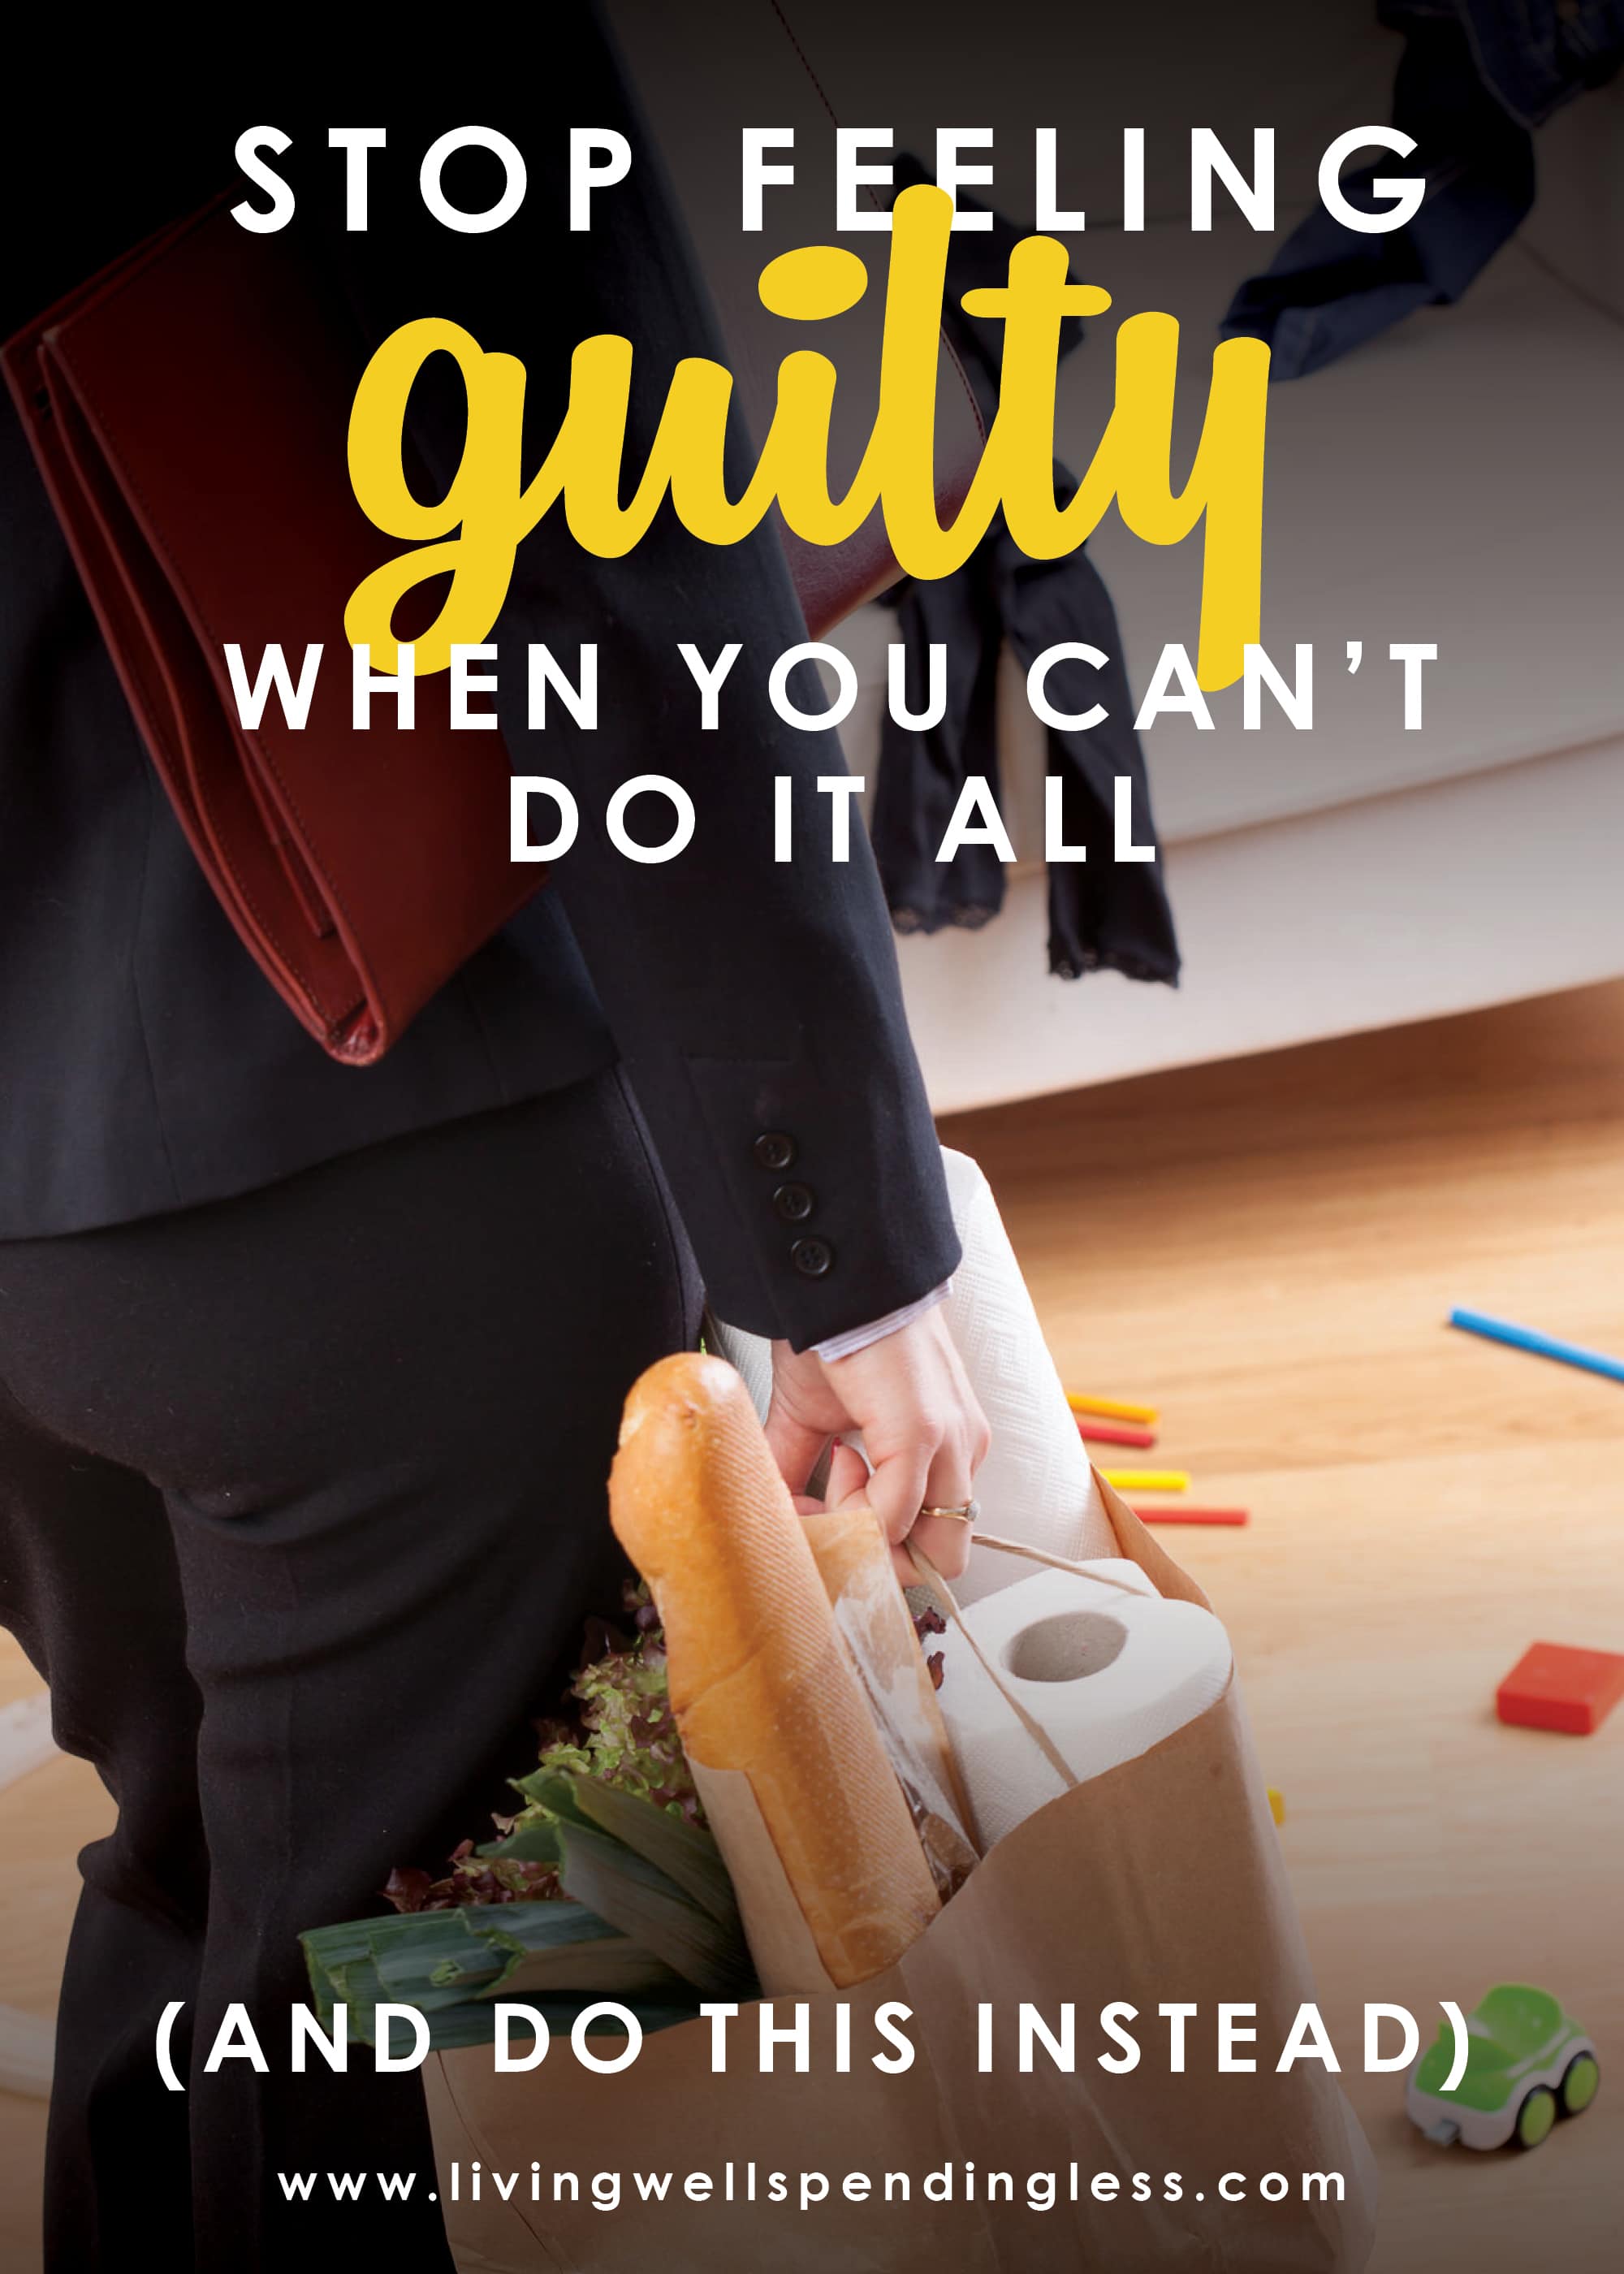 Raise your hand if you have ever felt guilty for not being able to do everything at once. The truth is, no one can do it all. So how do you know if you're choosing the right things? These 4 truths have helped me along the way & may be just what you need to hear today! #livingwellspendingless #productivity #momguilt #motivation #inspiration